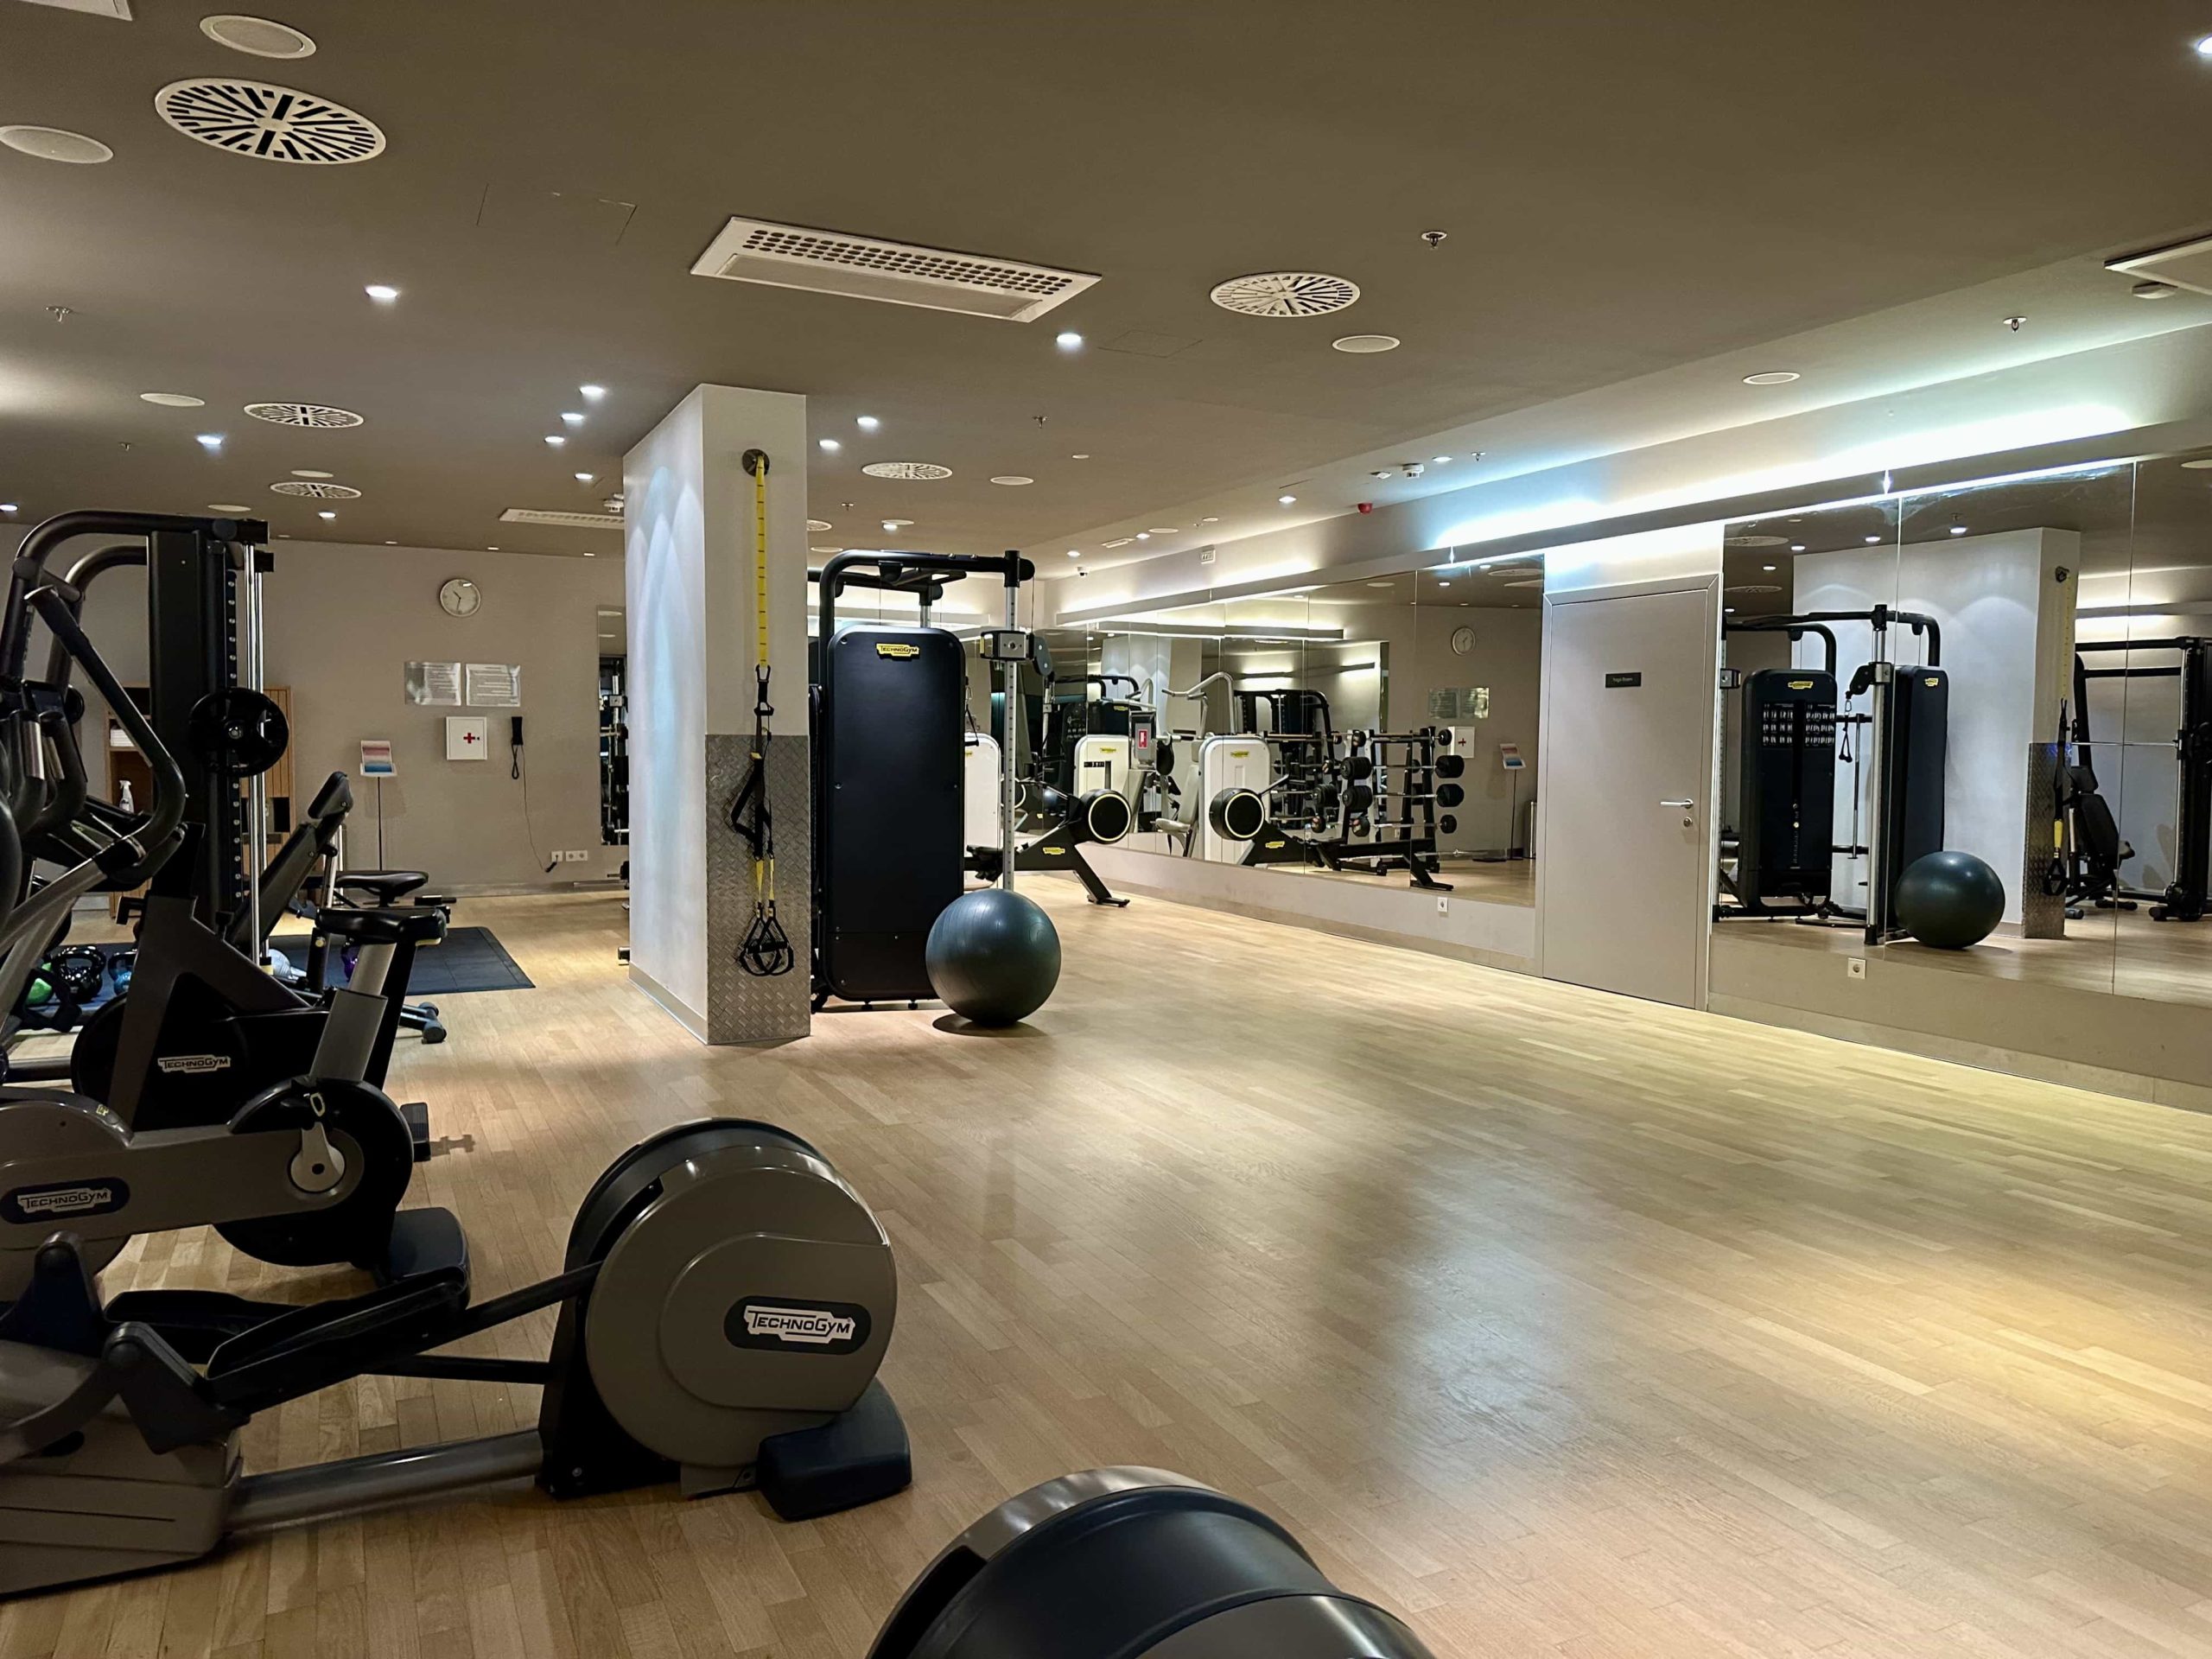 A gym with cardio machines on the left, and an open floor area on the right